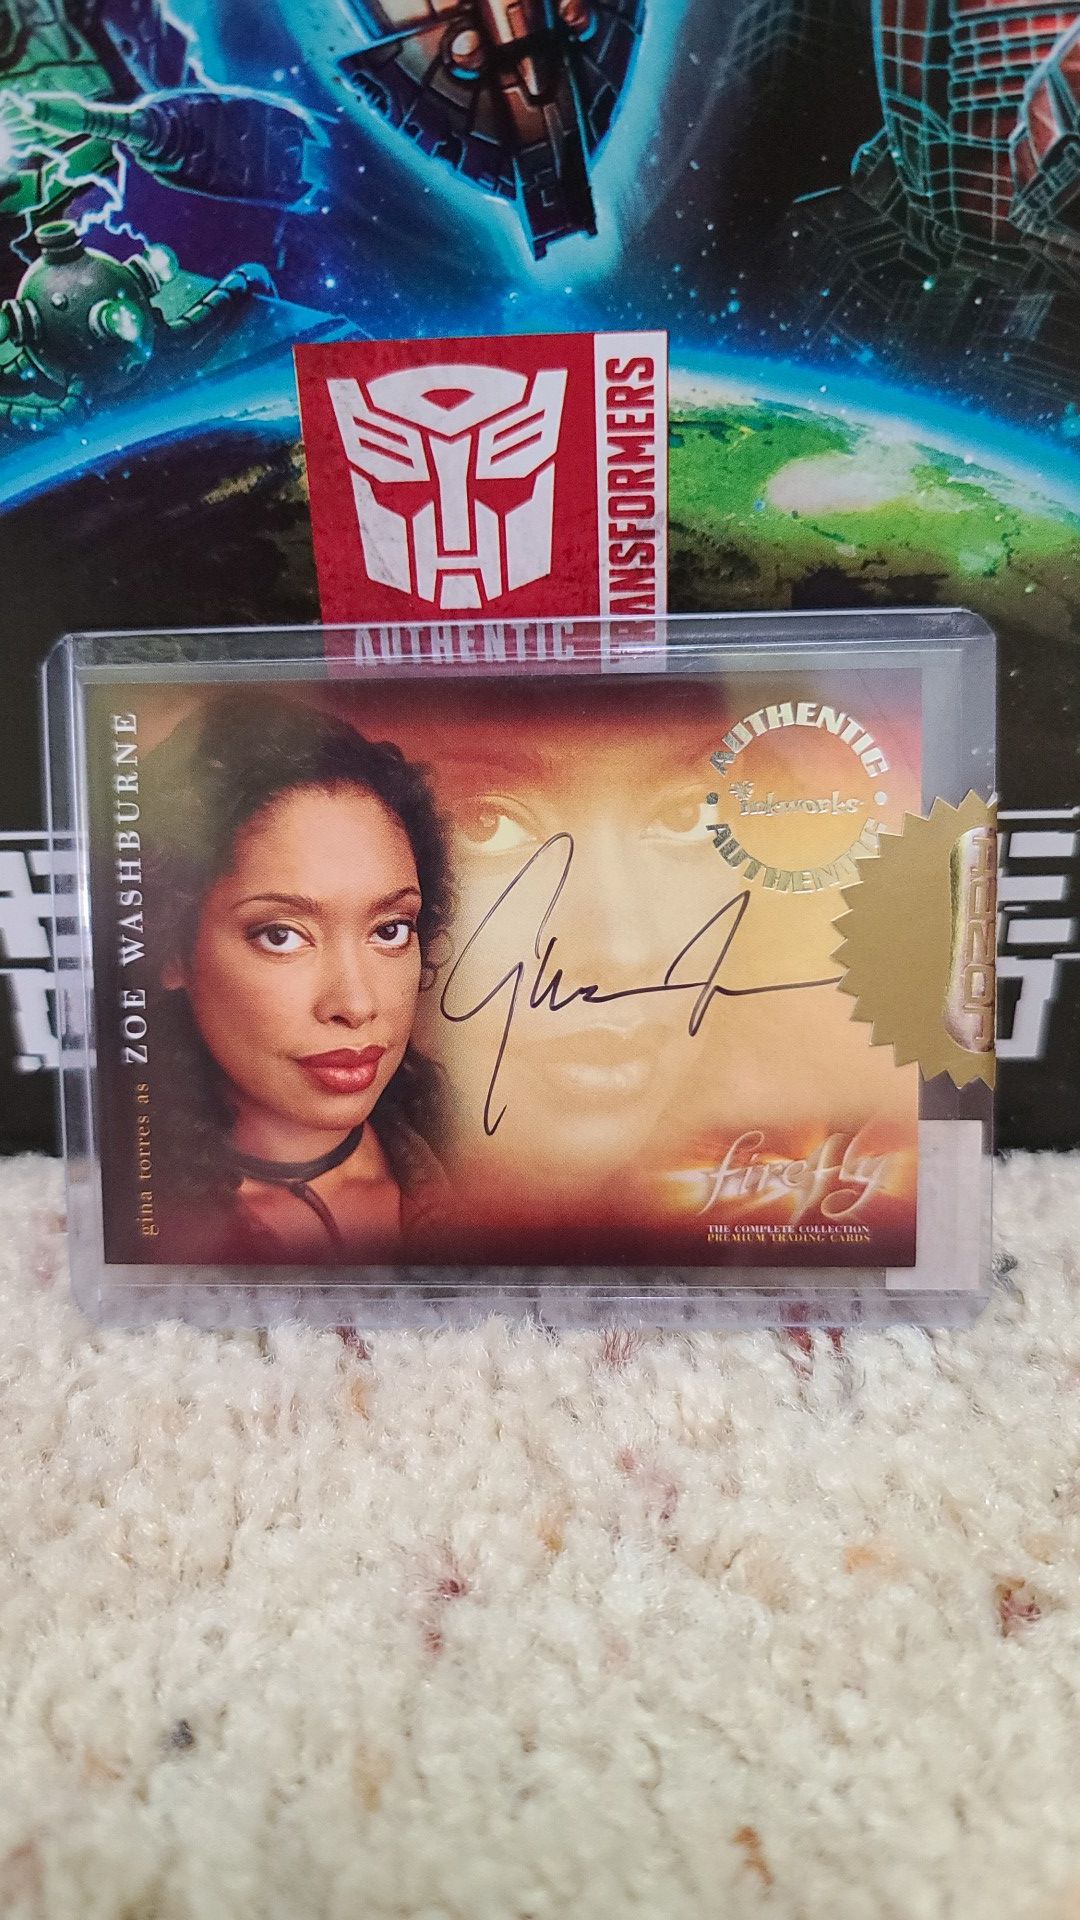 Inkworks autograph of Gina Torres as Zoe Washington in Firefly